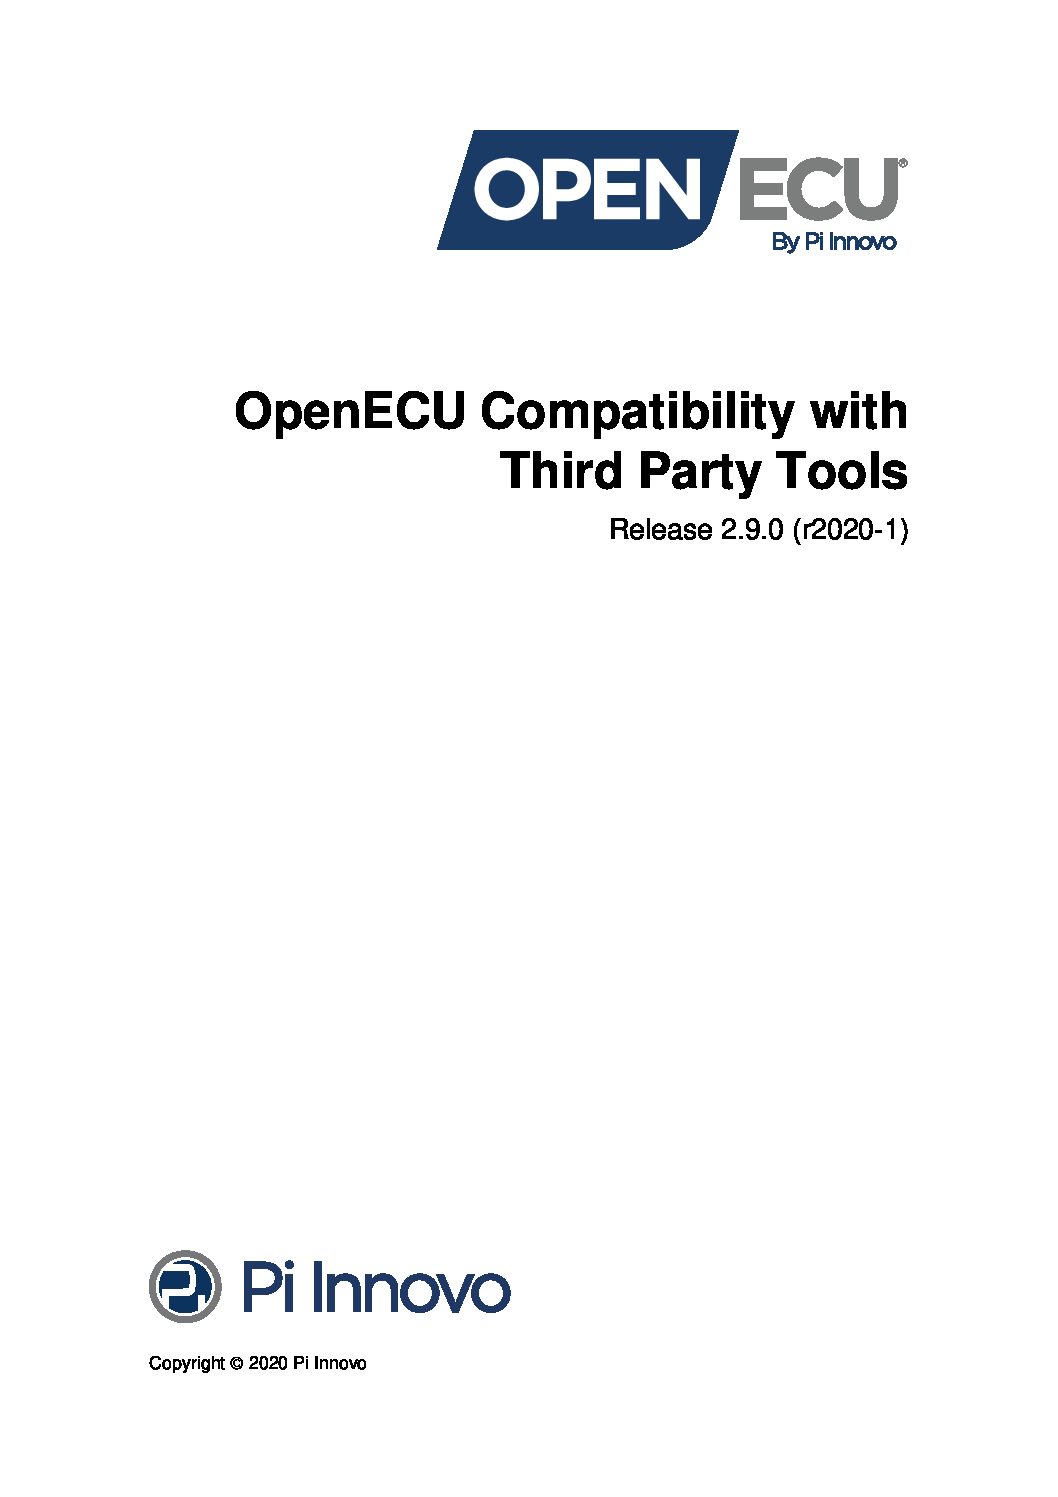 third_party_tool_compatibility_2_9_0